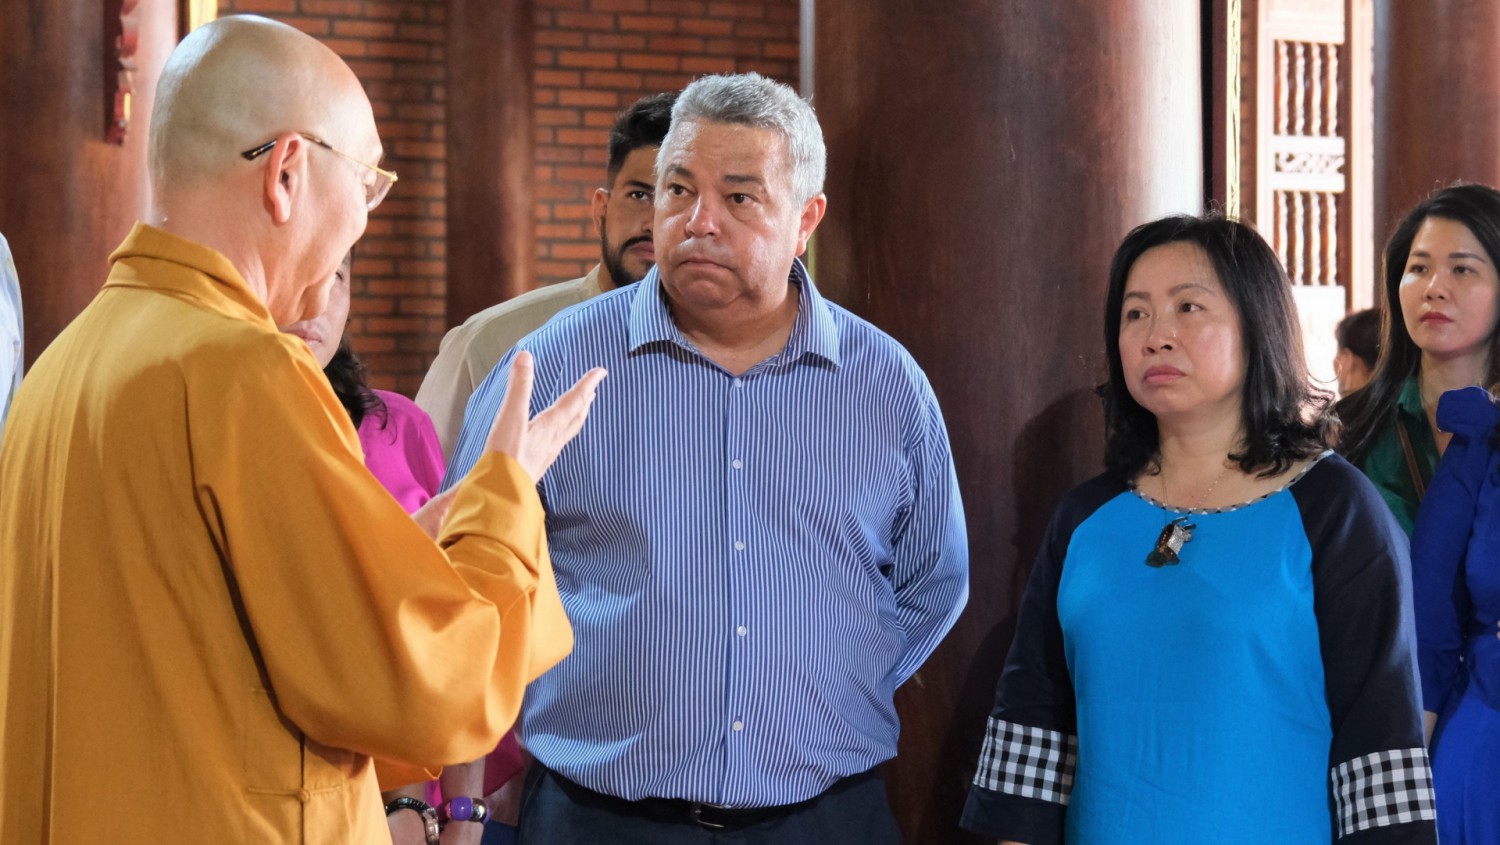 Comrade Thai Thu Xuong and Mr. Ulises Guilarte de Nacimiento and members of the delegation listened to introductions and learned about the unique architectural work of the Zen Monastery as well as the Truc Lam Yen Tu Zen Monastery founded by Buddha Emperor Tran Nhan Tong.